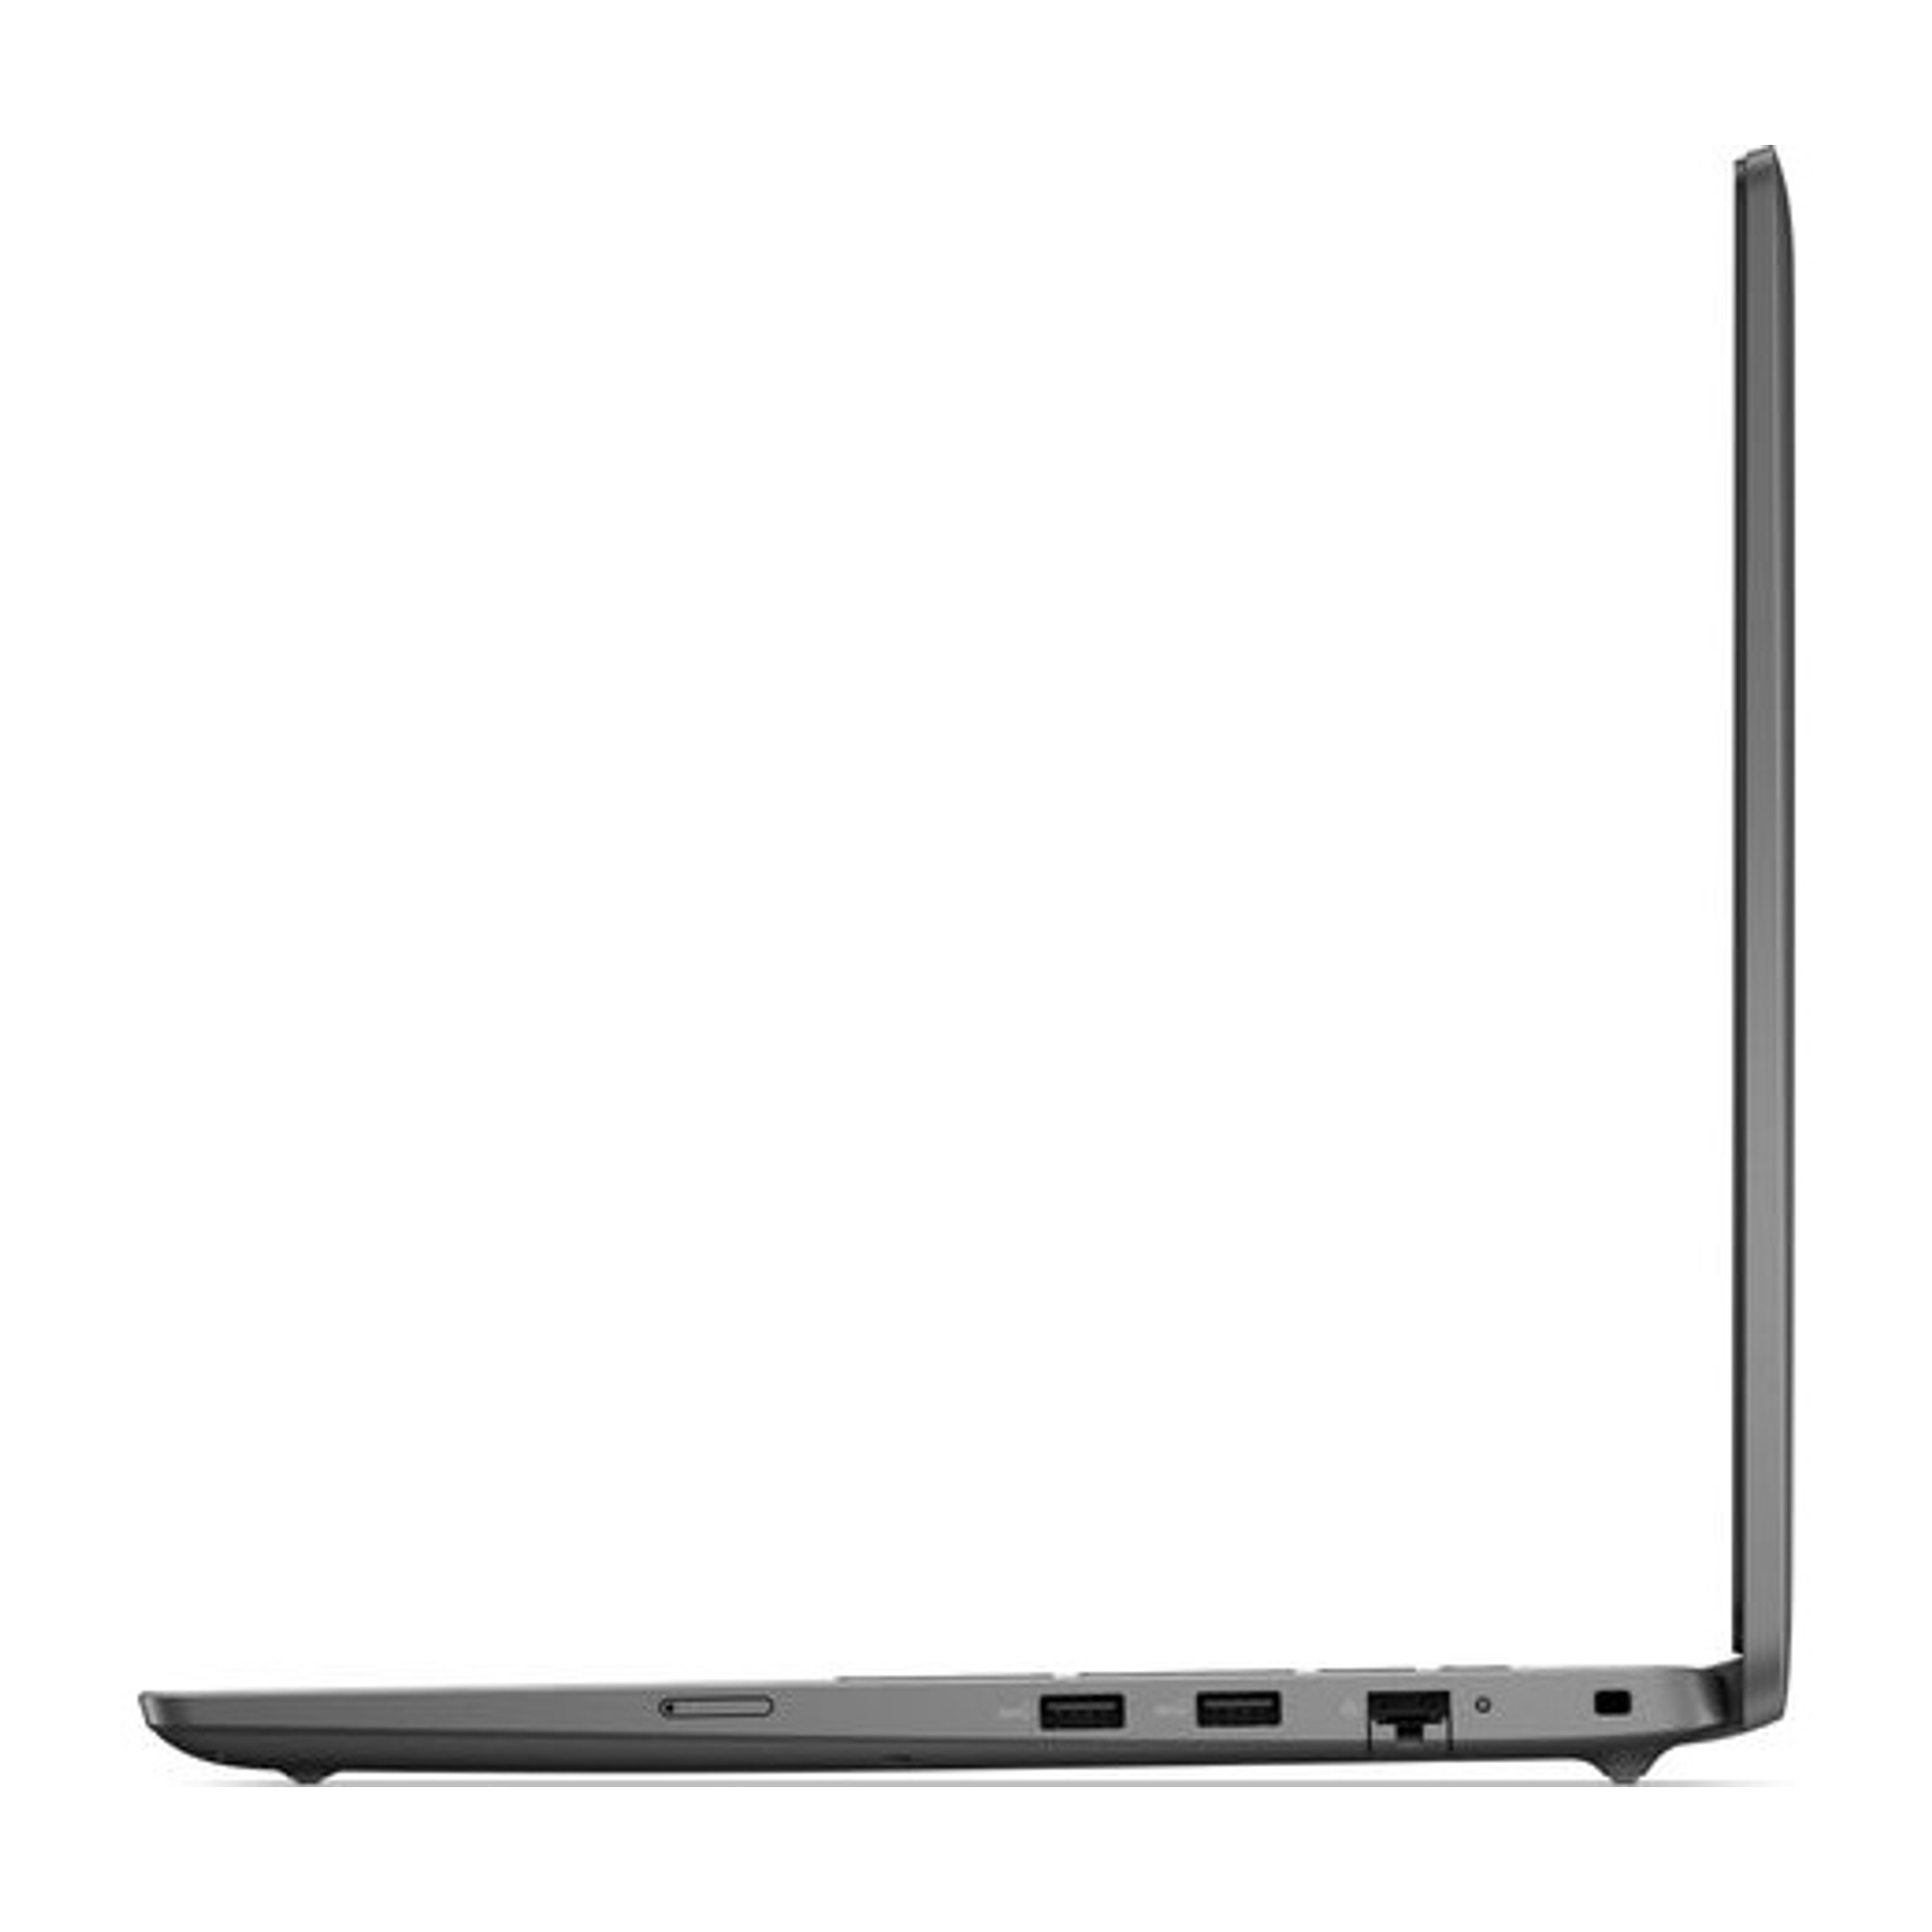 DELL L3540-12 Laptop / Notebook 4